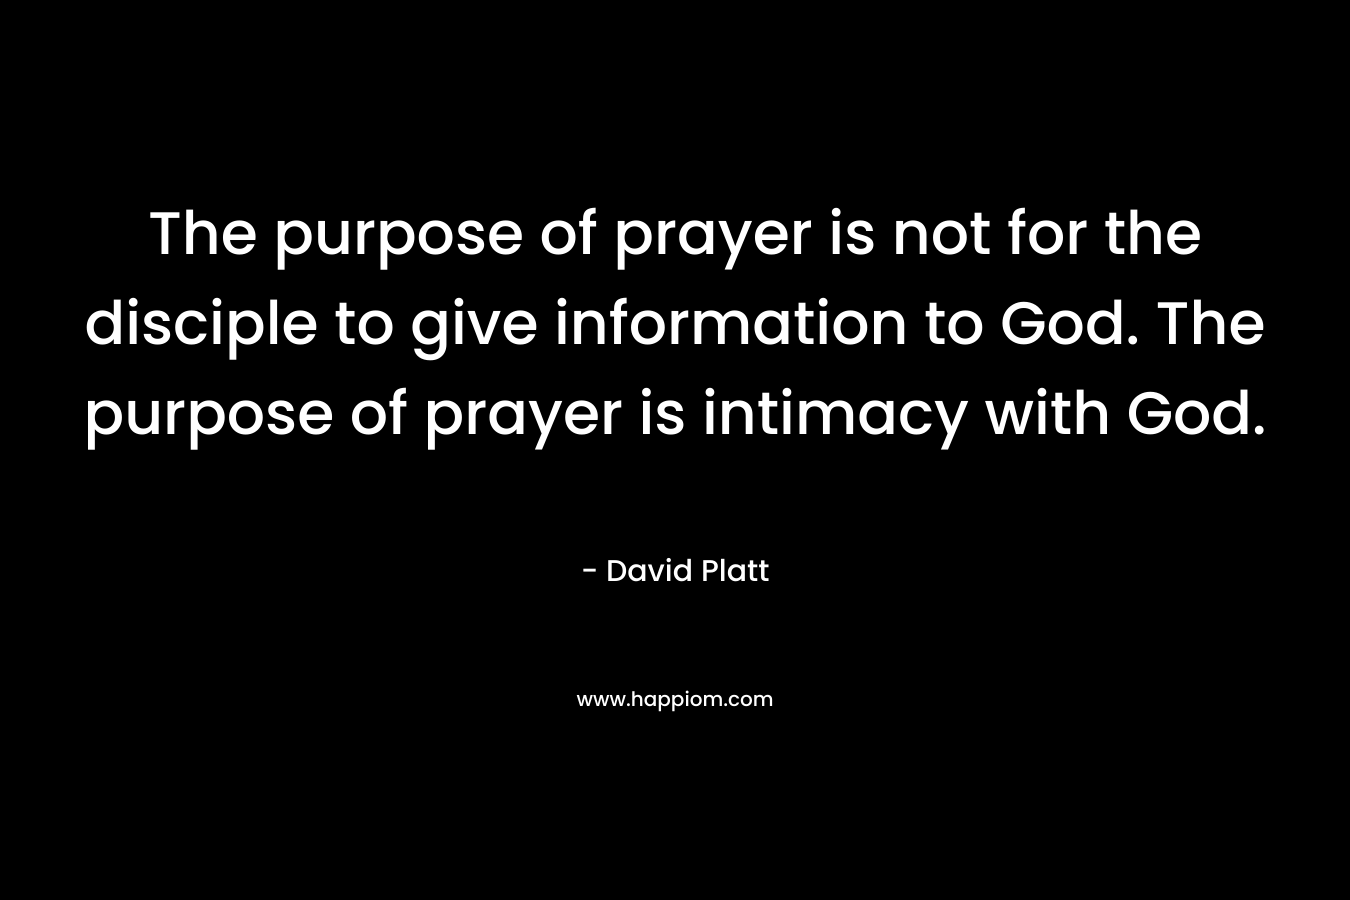 The purpose of prayer is not for the disciple to give information to God. The purpose of prayer is intimacy with God.